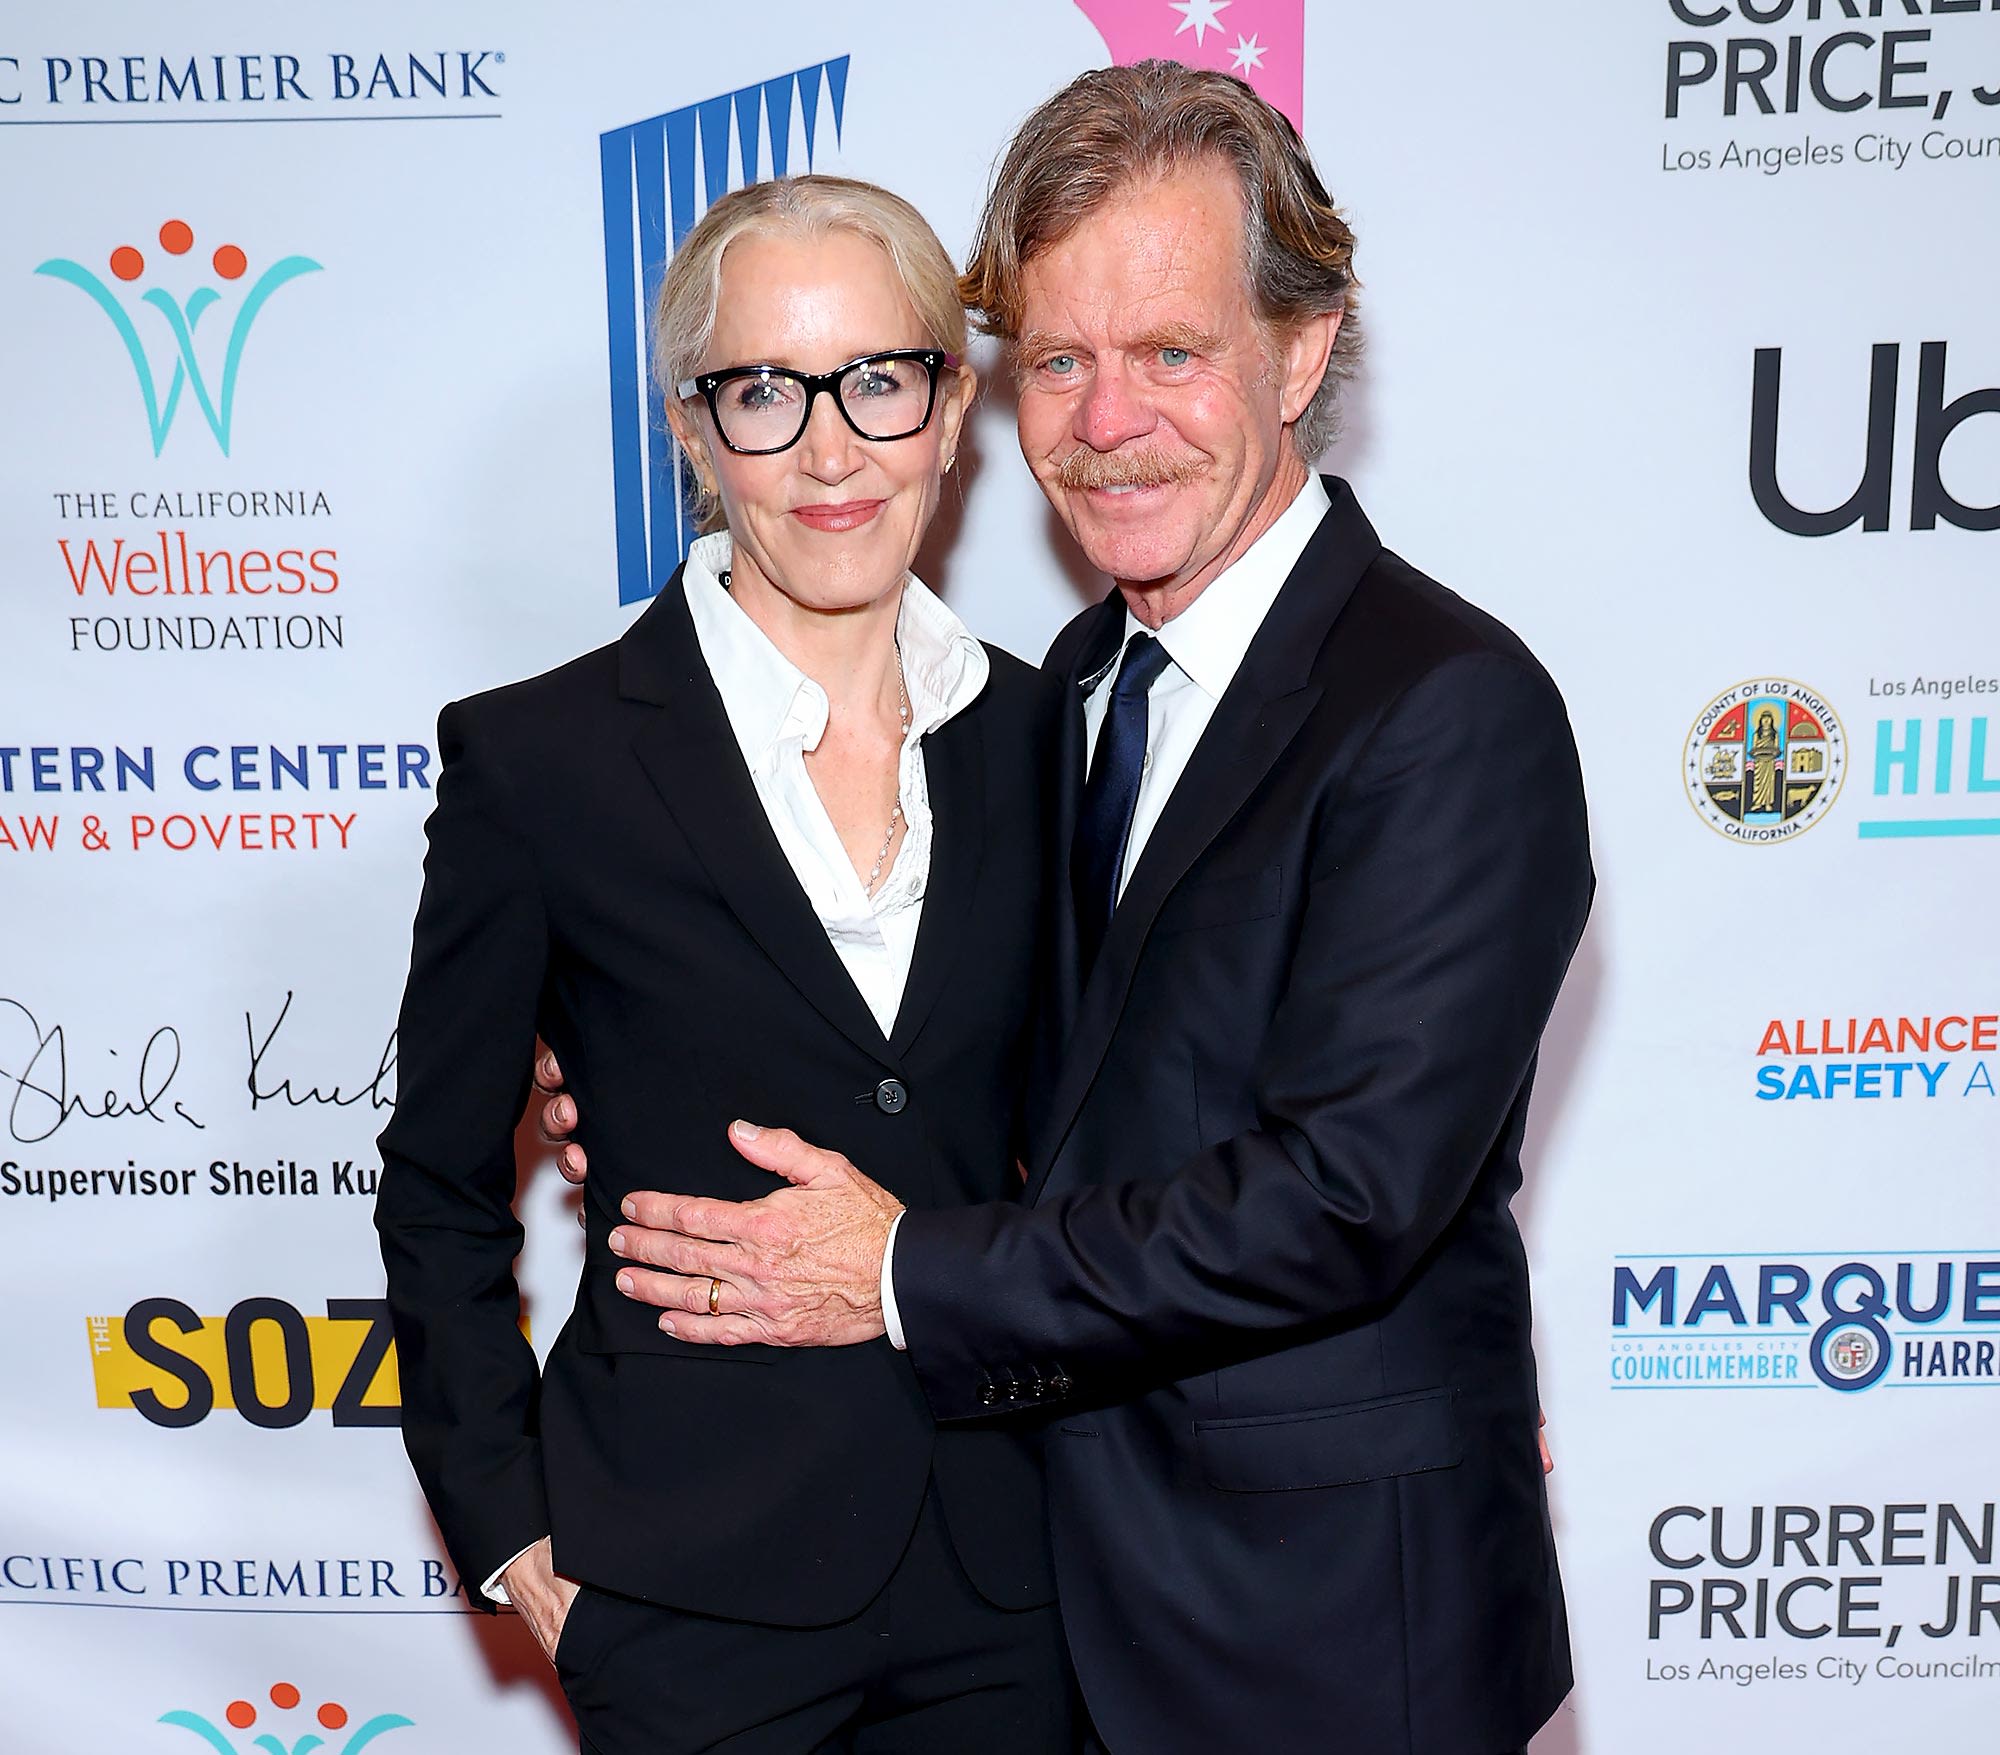 Felicity Huffman and Husband William H. Macy to Star in Fox’s ‘Accused’ Season 2